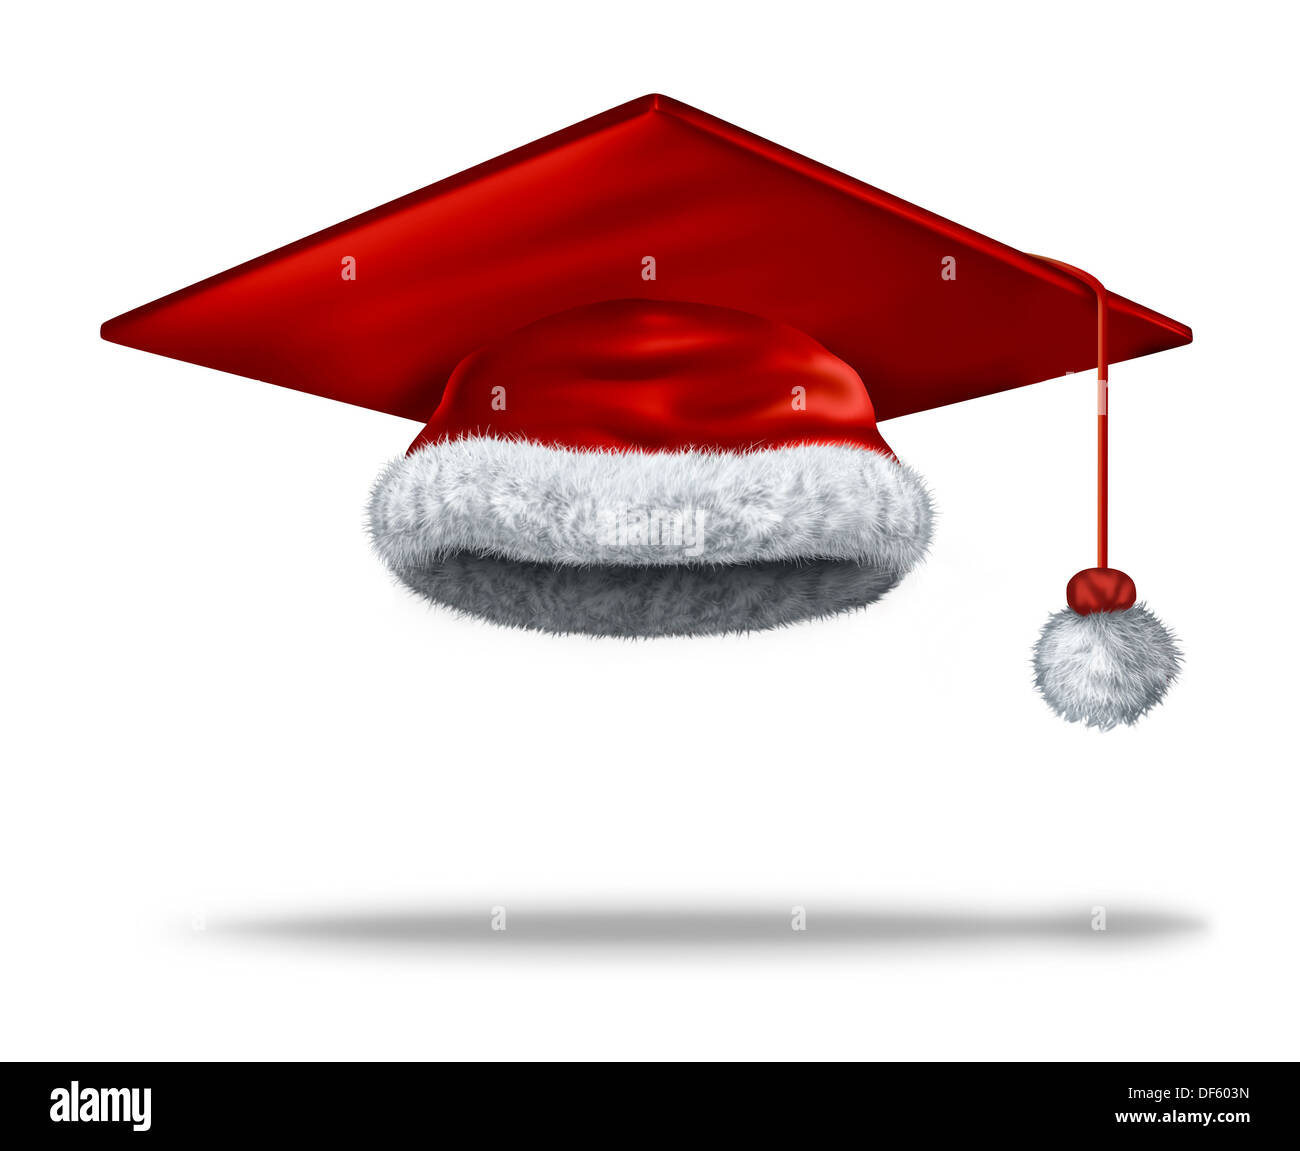 Christmas education holiday concept with a mortar board or graduation cap as a red velvet santa clause hat with white fur trim as a festive symbol of winter school break and new year celebration on a white background. Stock Photo